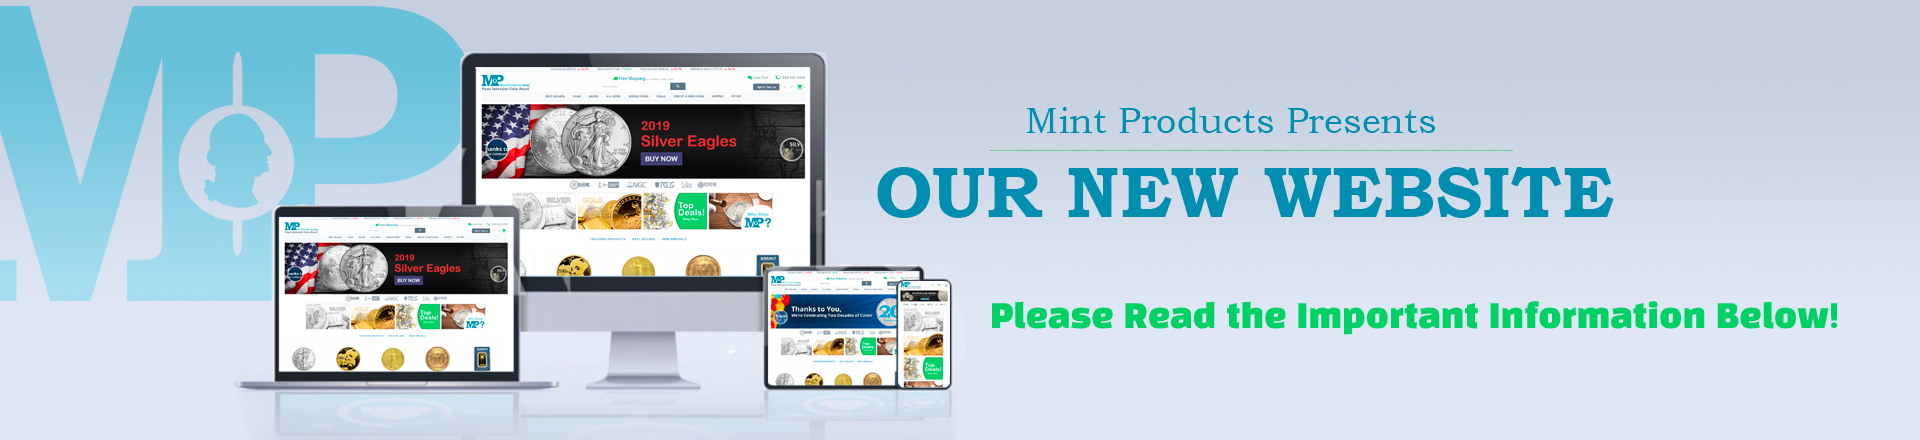 Presenting MintProducts new website